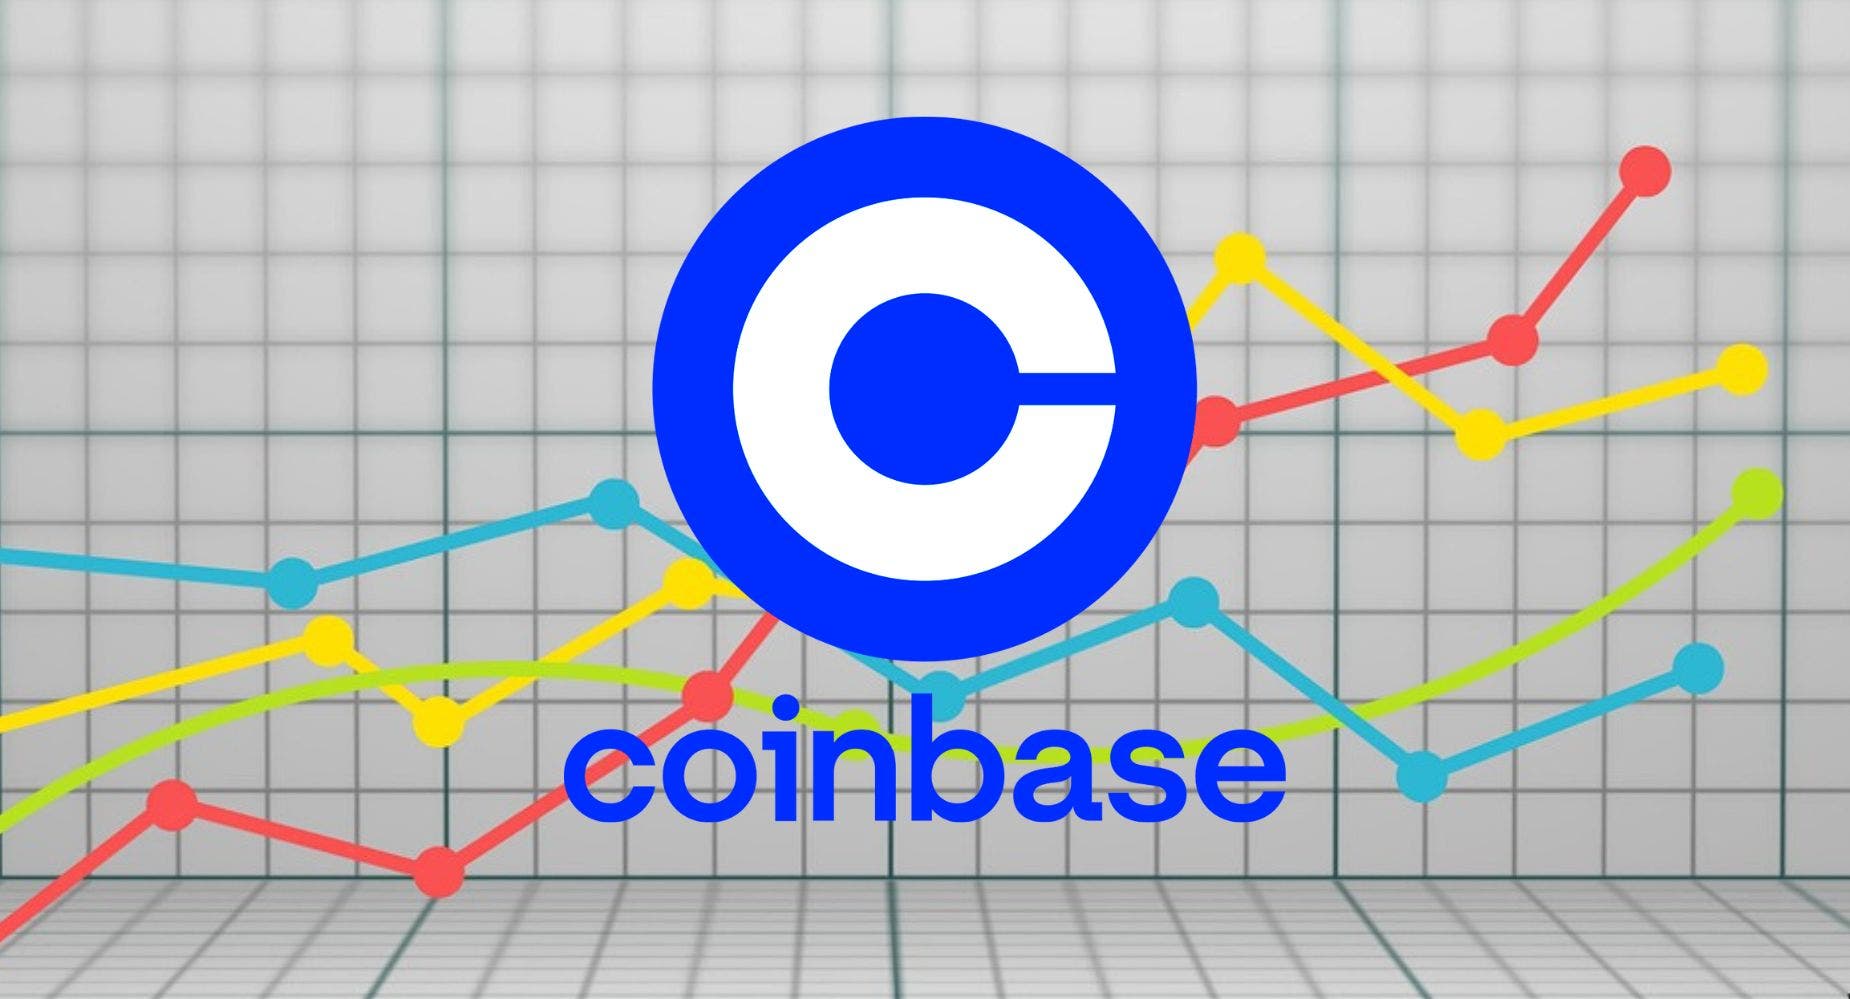 What To Watch For On Coinbase Global As The Stock Reacts To Q2 Earnings Results